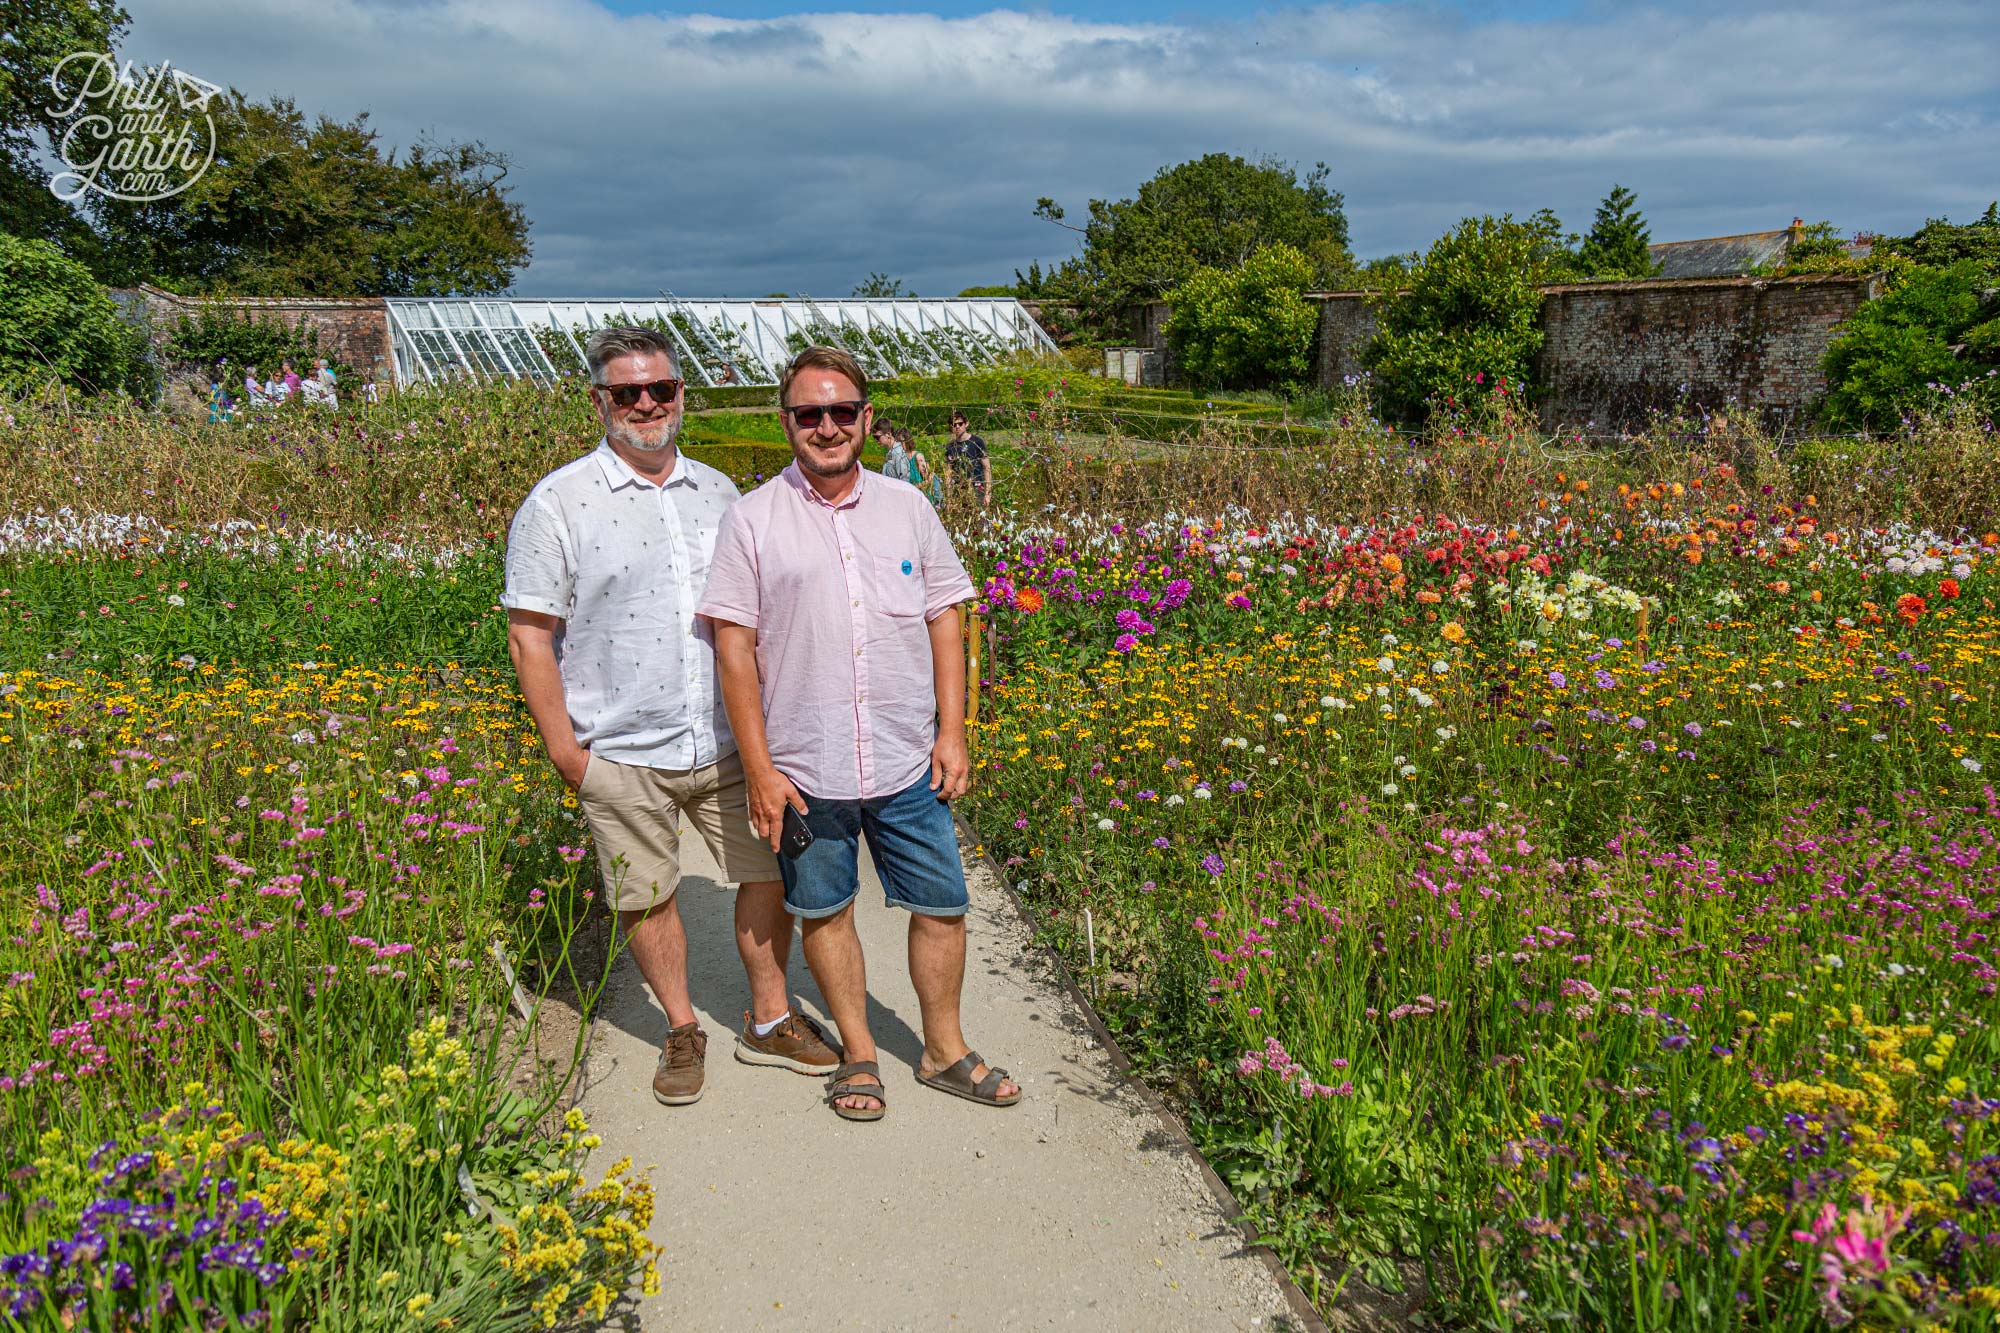 Phil and Garth amongst the colourful blooms of Heligan's Flower Garden